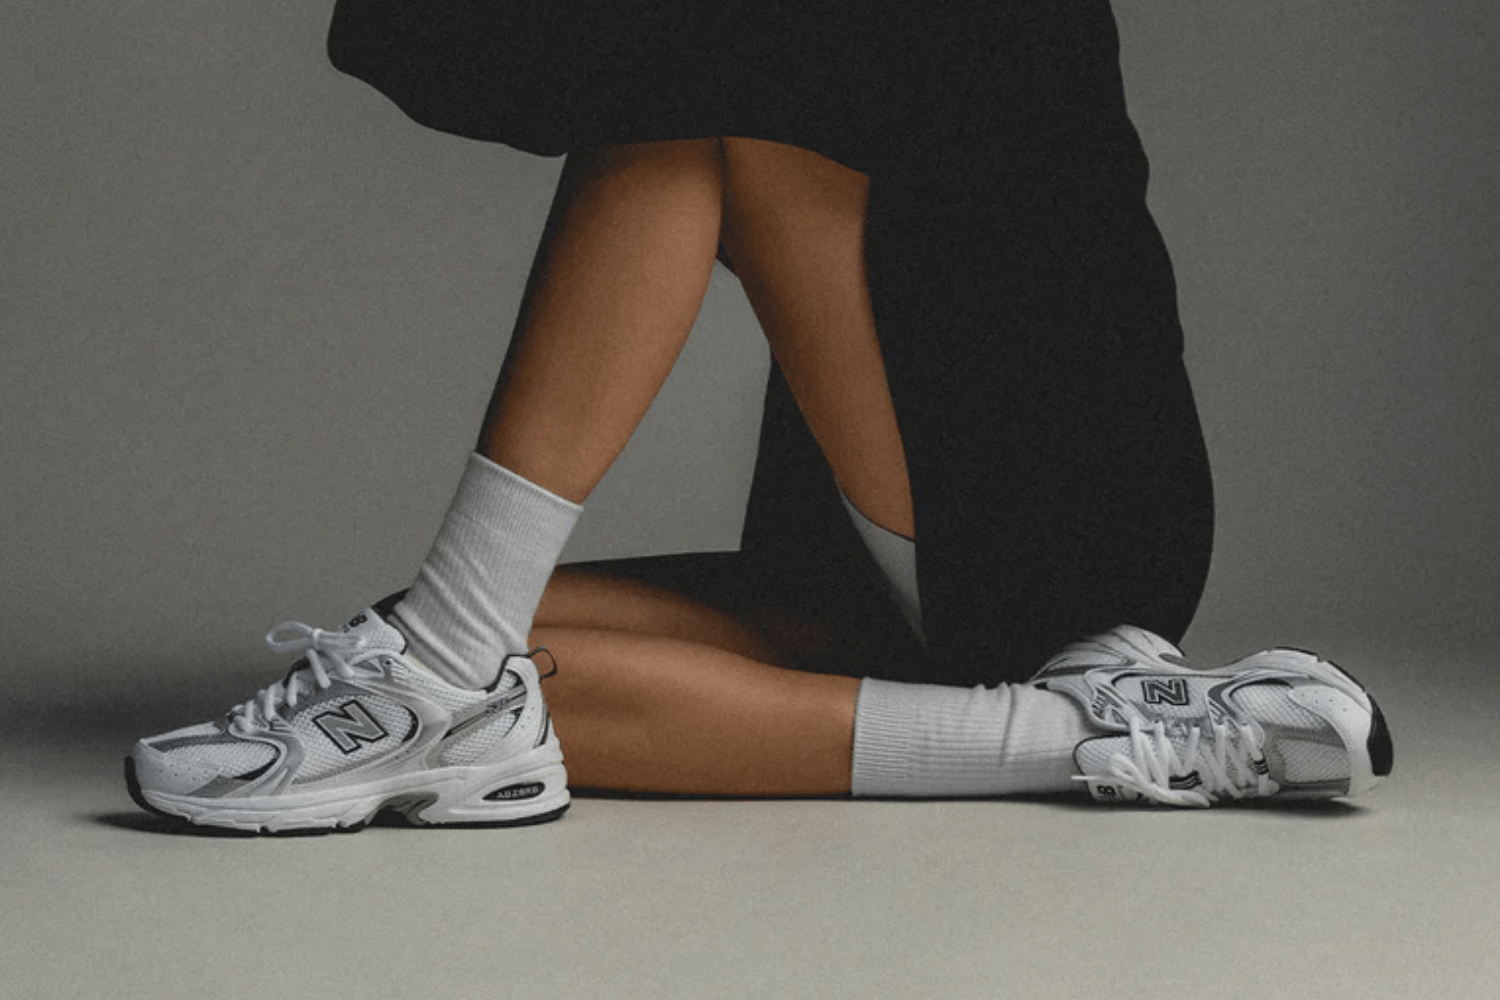 Must-have white sneakers for WMNS